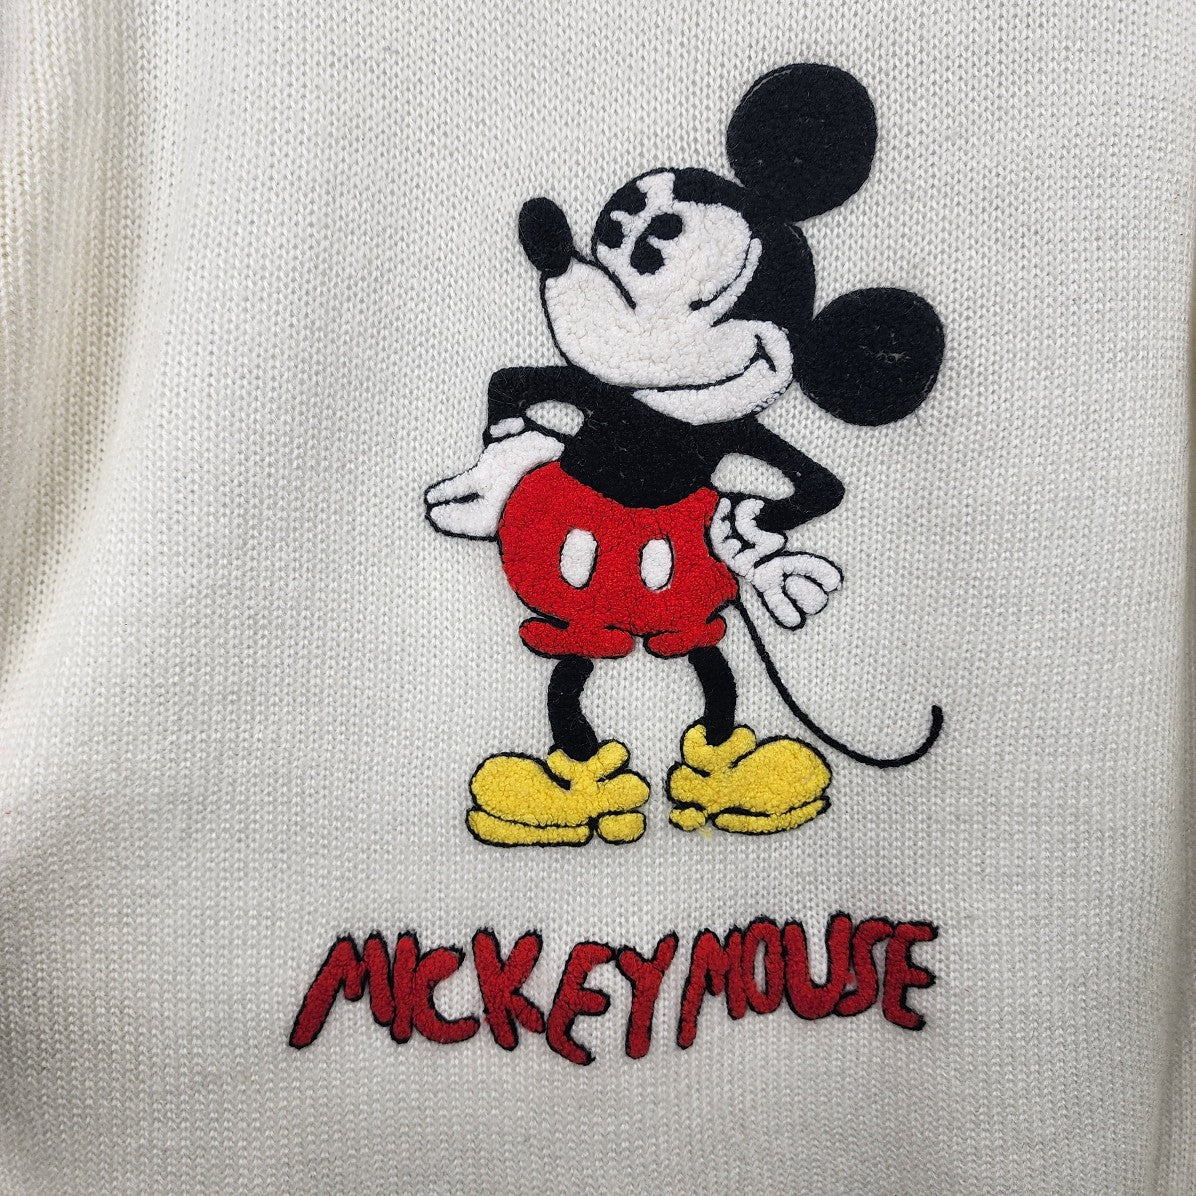 Vintage Disney Mickey Mouse Knit Long Sleeve Sweater Top Size M